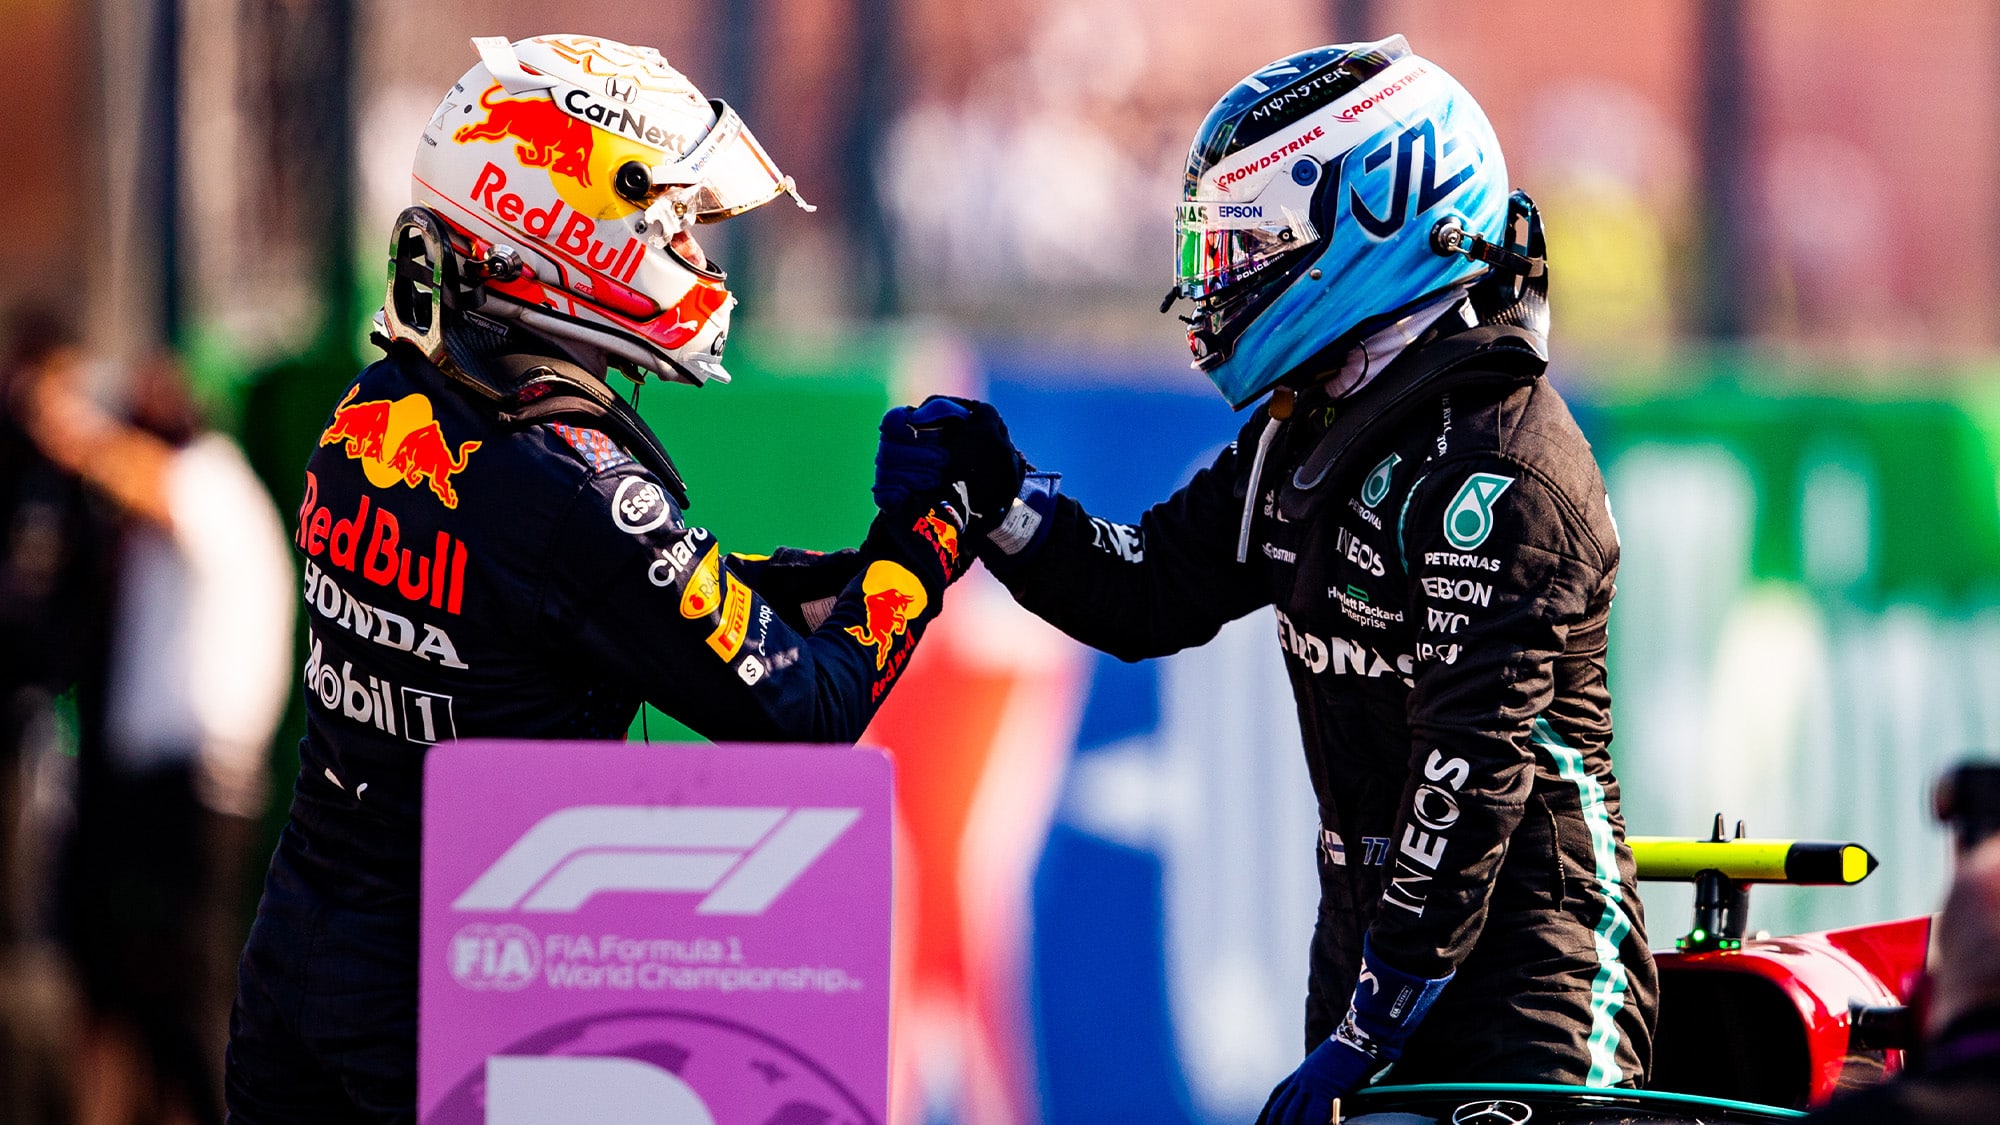 Verstappen shakes hands with Bottas after 2021 sprint qualifying at Monza